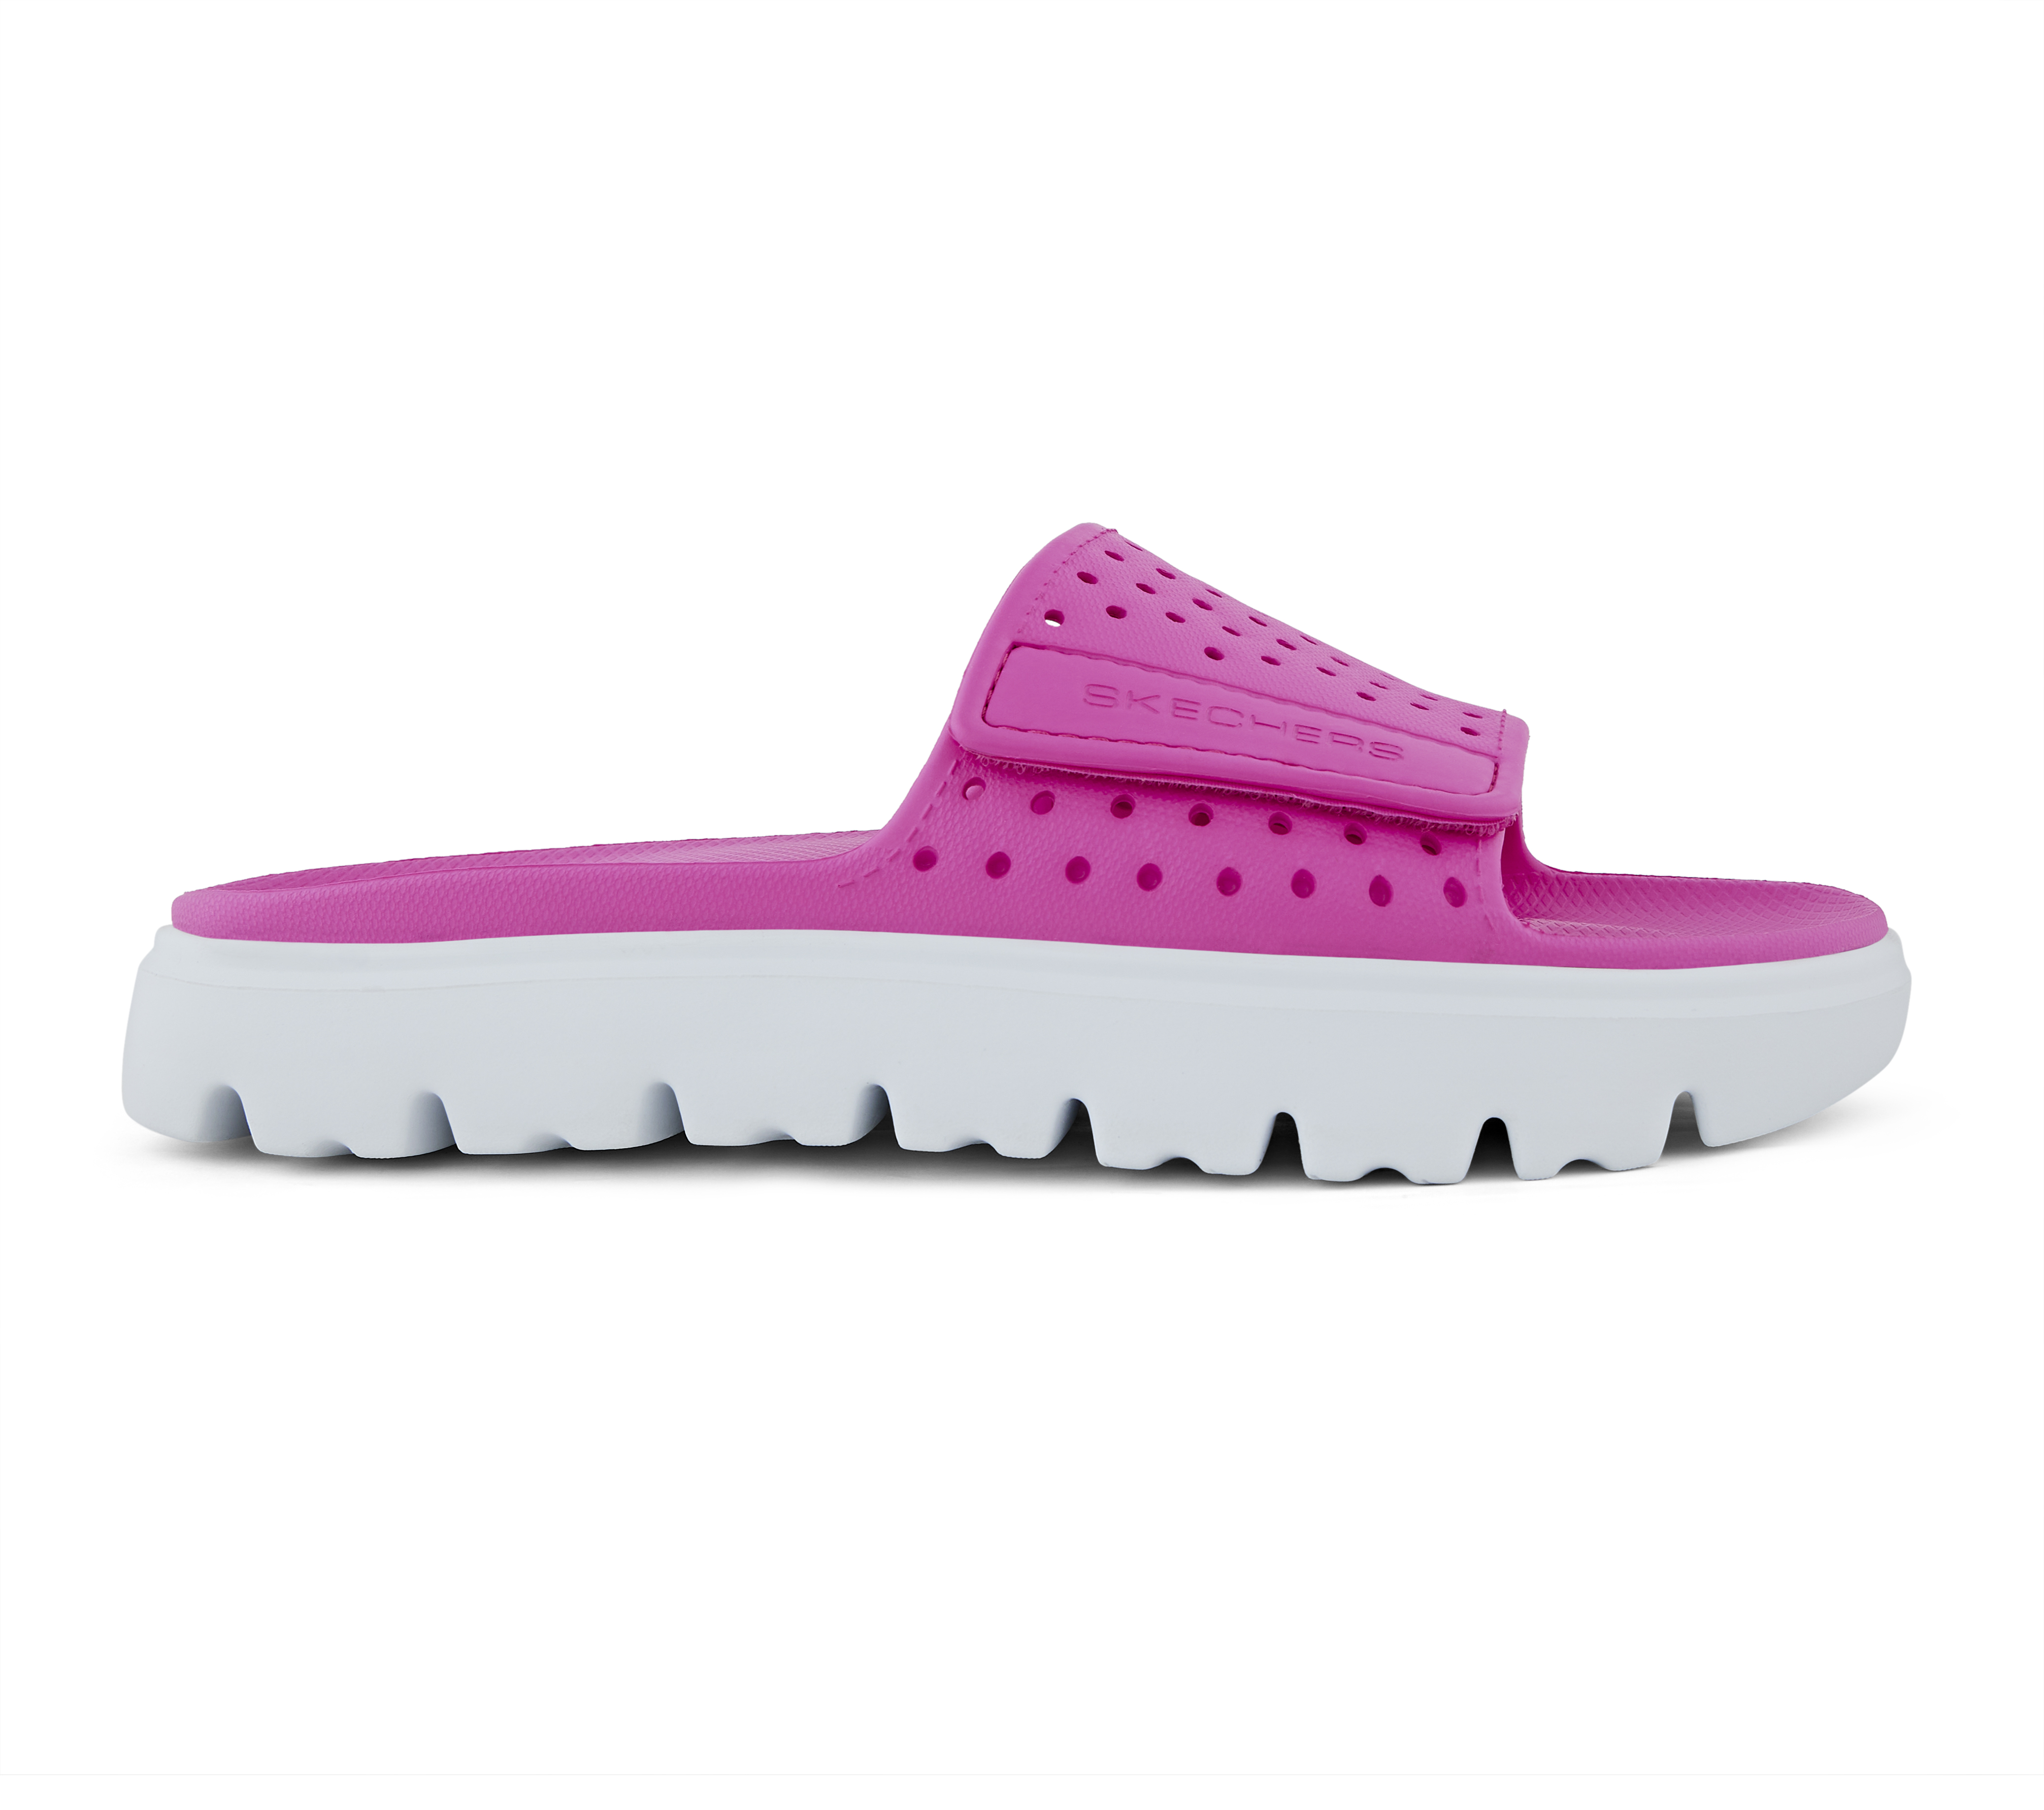 FOAMIES TOP-LEVEL-PEACHY VIBE, HHOT PINK Footwear Right View